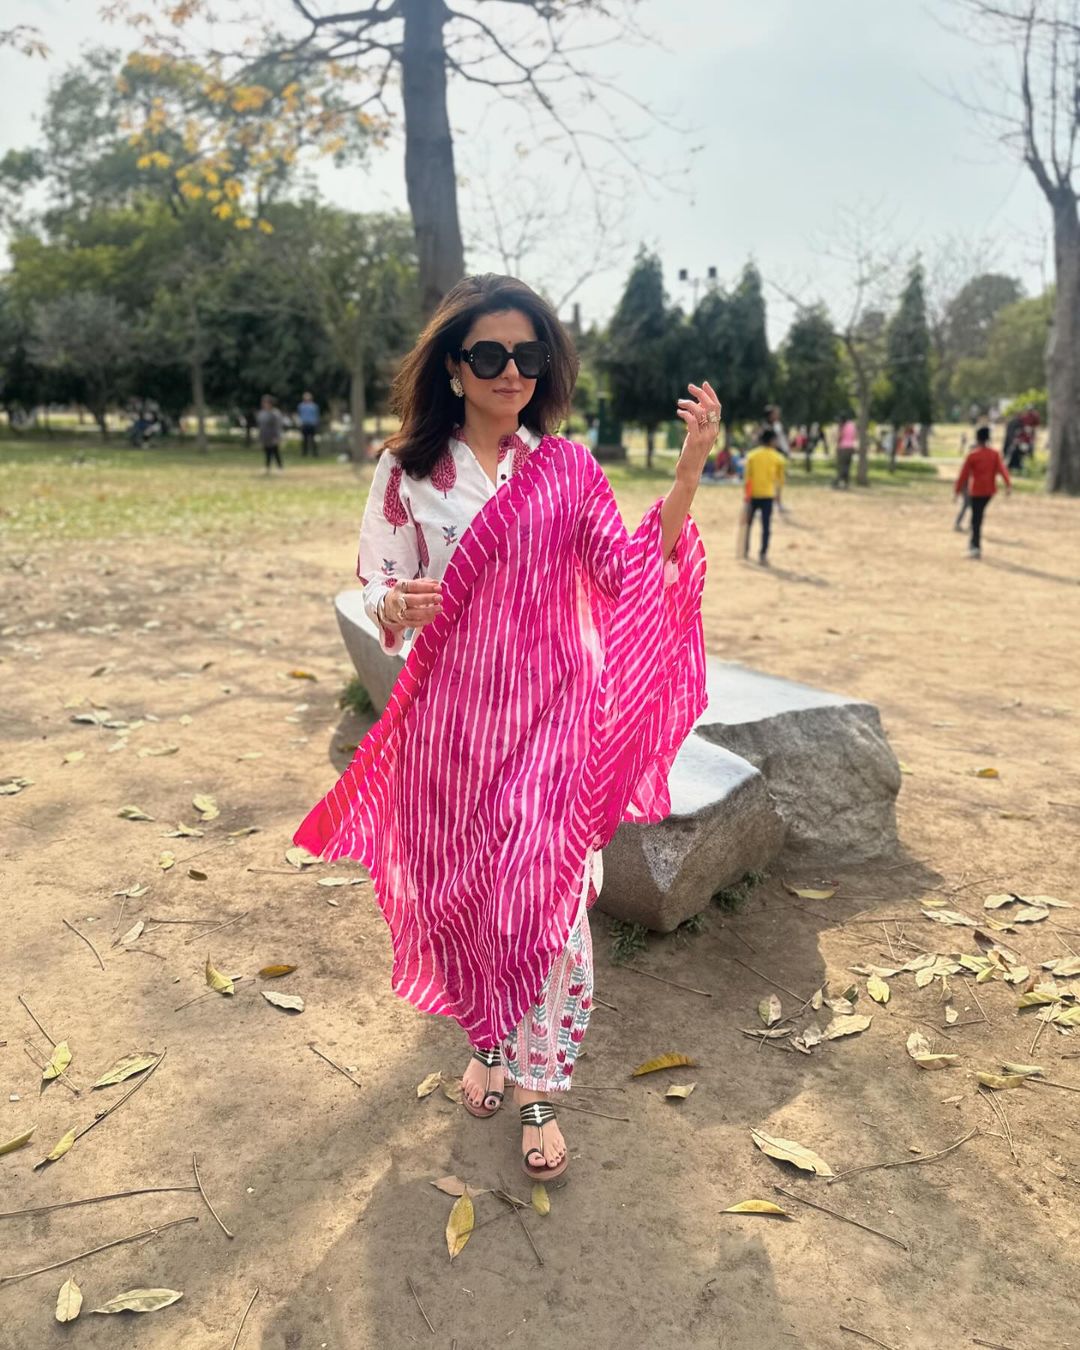 Delhi Vibes! Jawan Actress Ridhi Dogra Visits Her Home Town; She Looks So Radiant In Her Latest Snapshots!